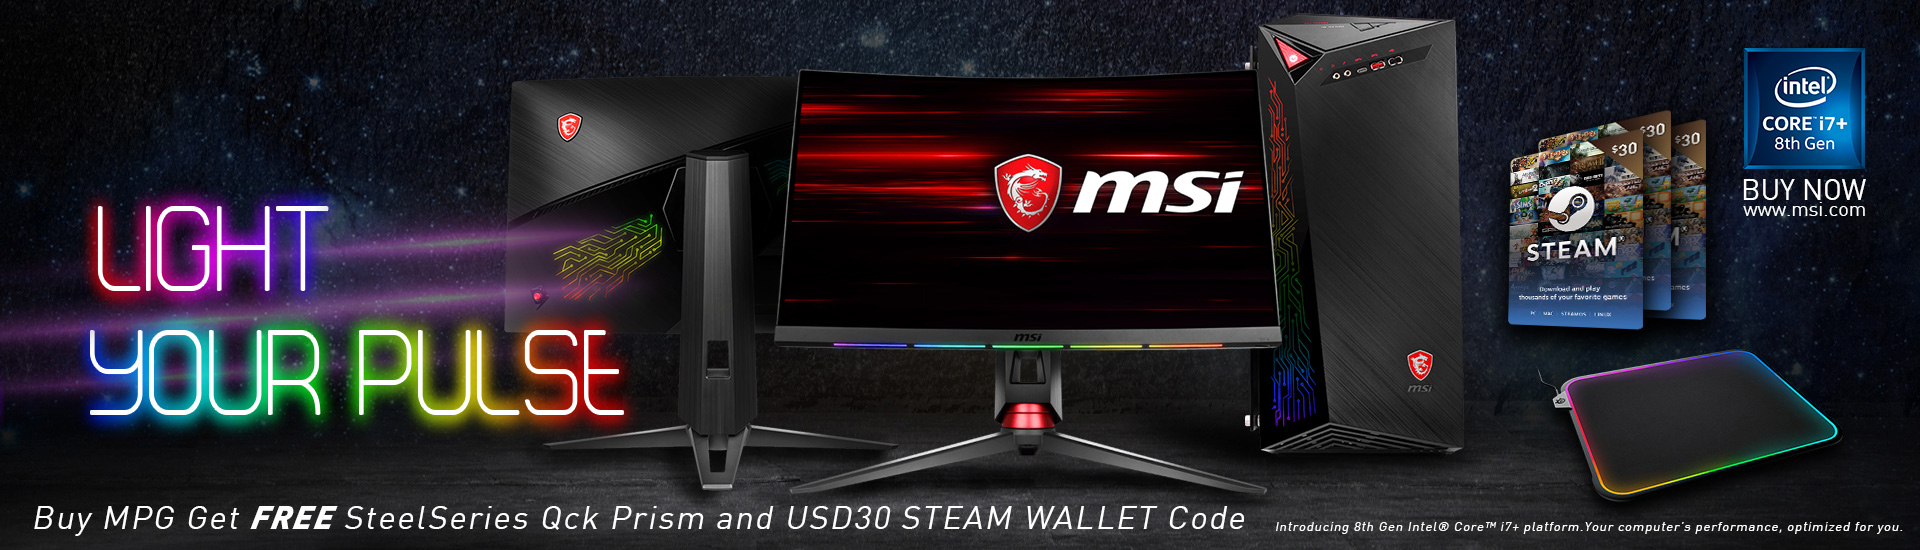 msi support center